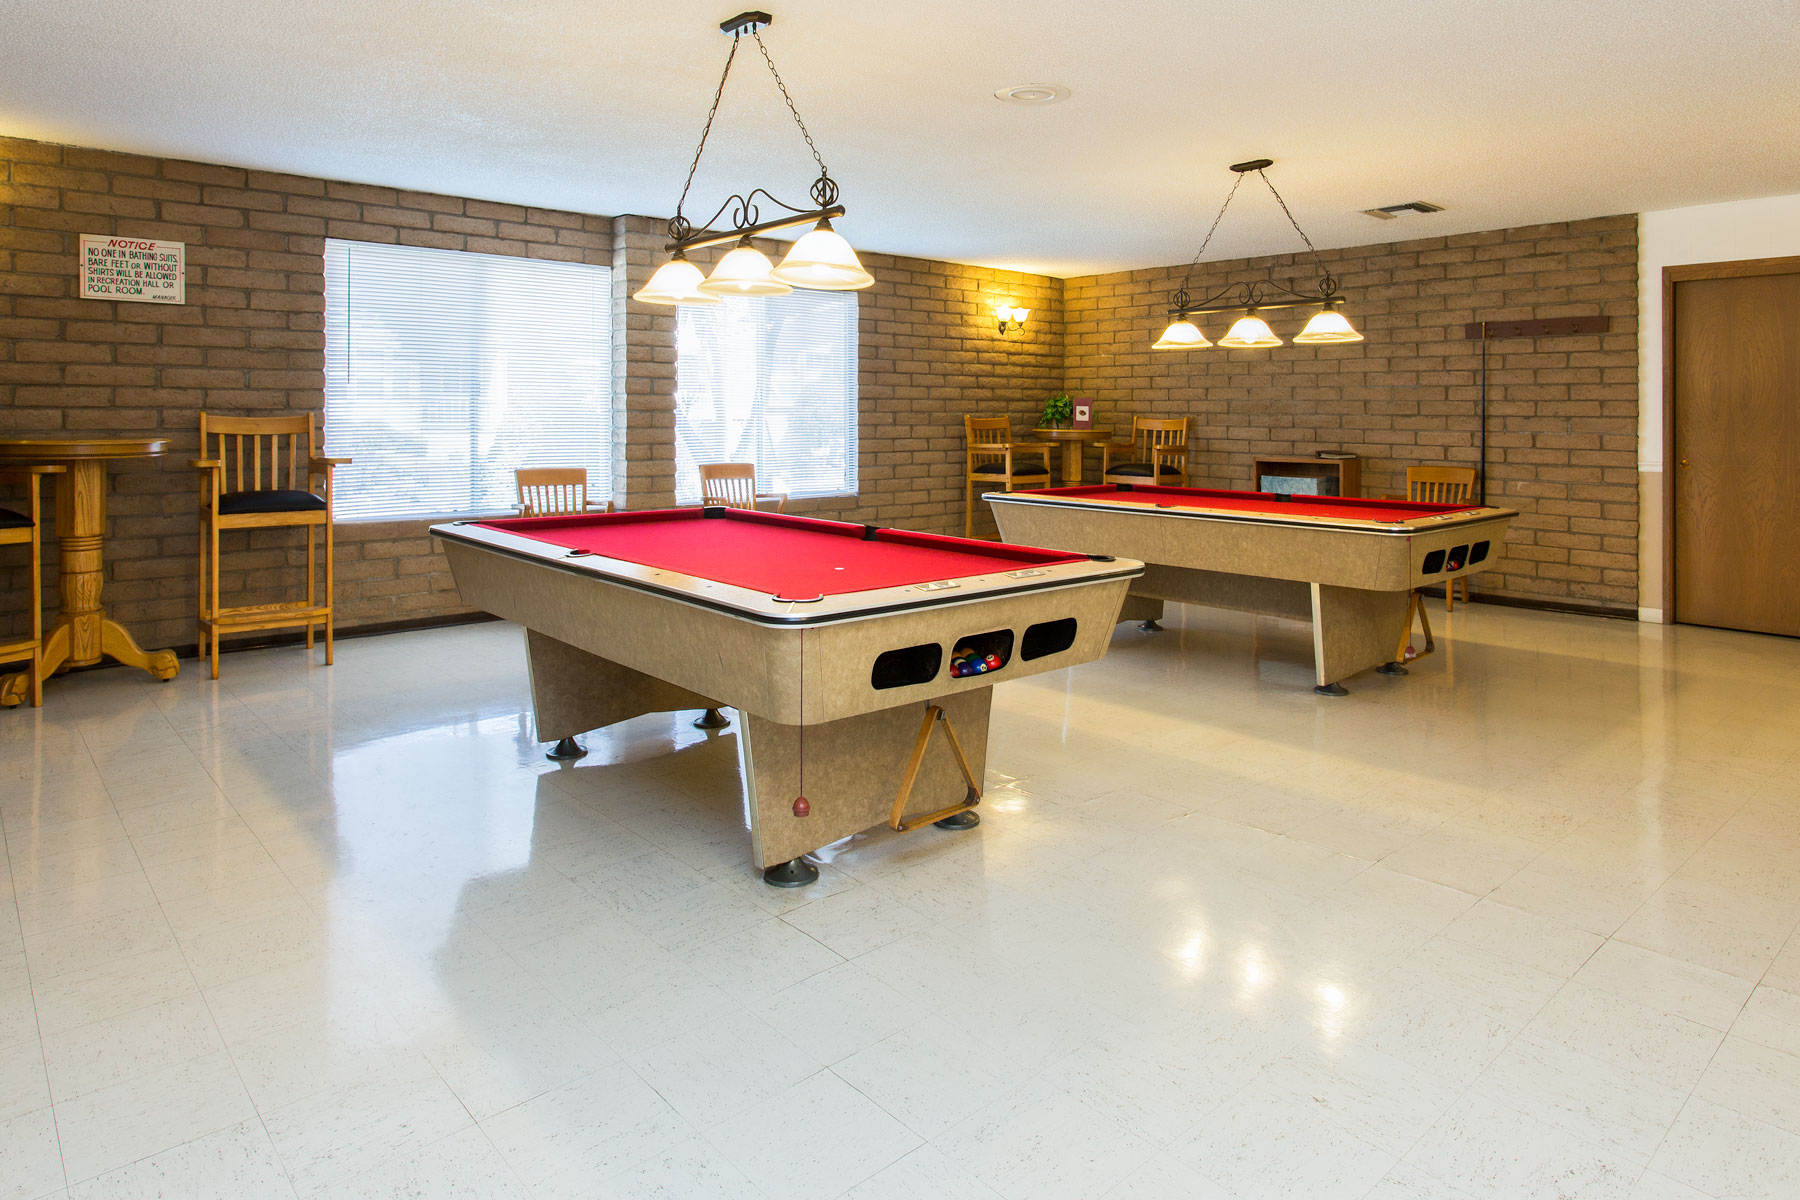 Billiards room equipped with two pool tables and seating areas. Walls lined with light brick to give a rustic feel.